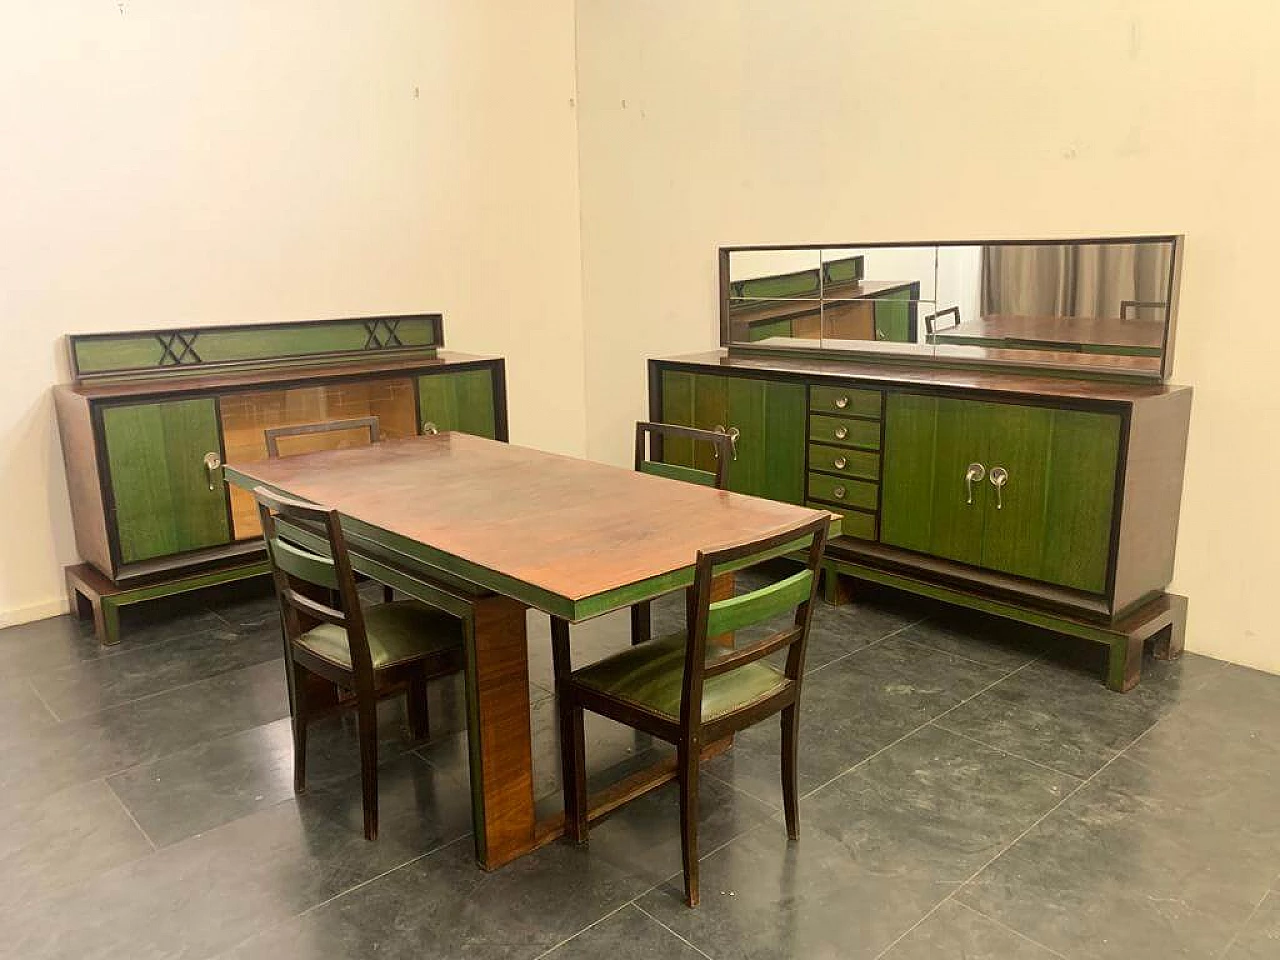 4 Art Deco style chairs in green-stained wood, 1930s 12